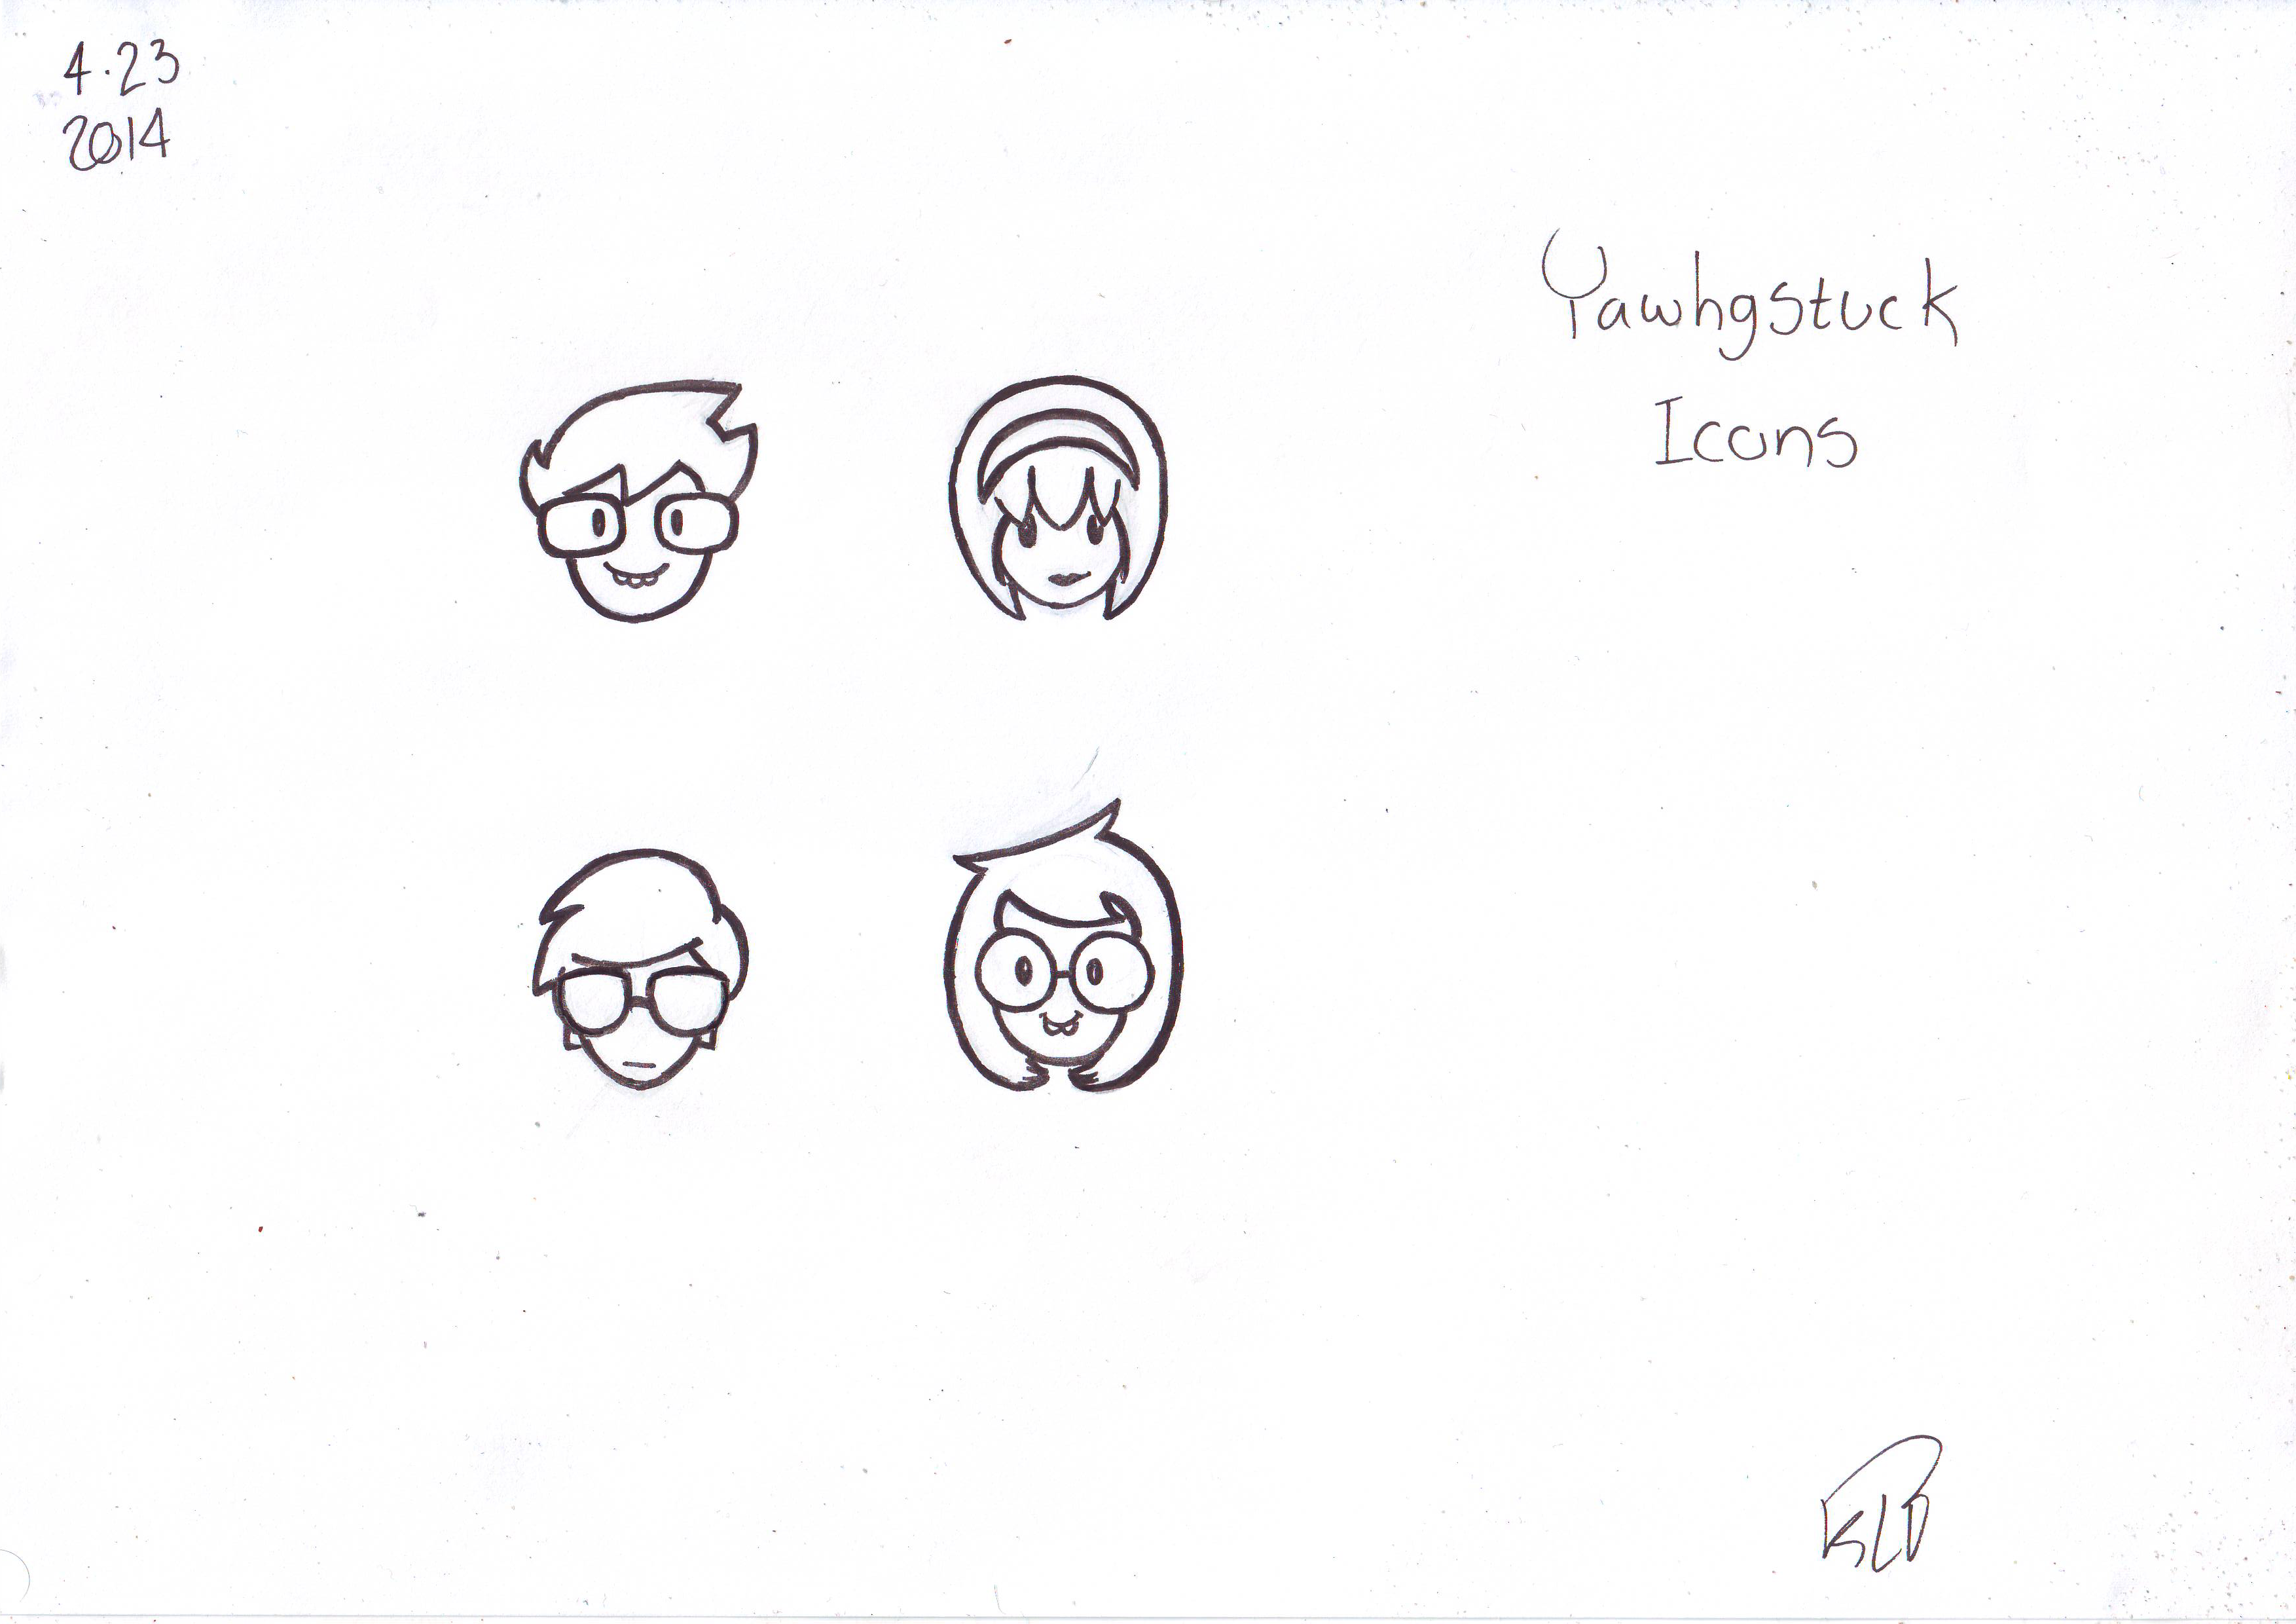 Icons for Yawhgstuck